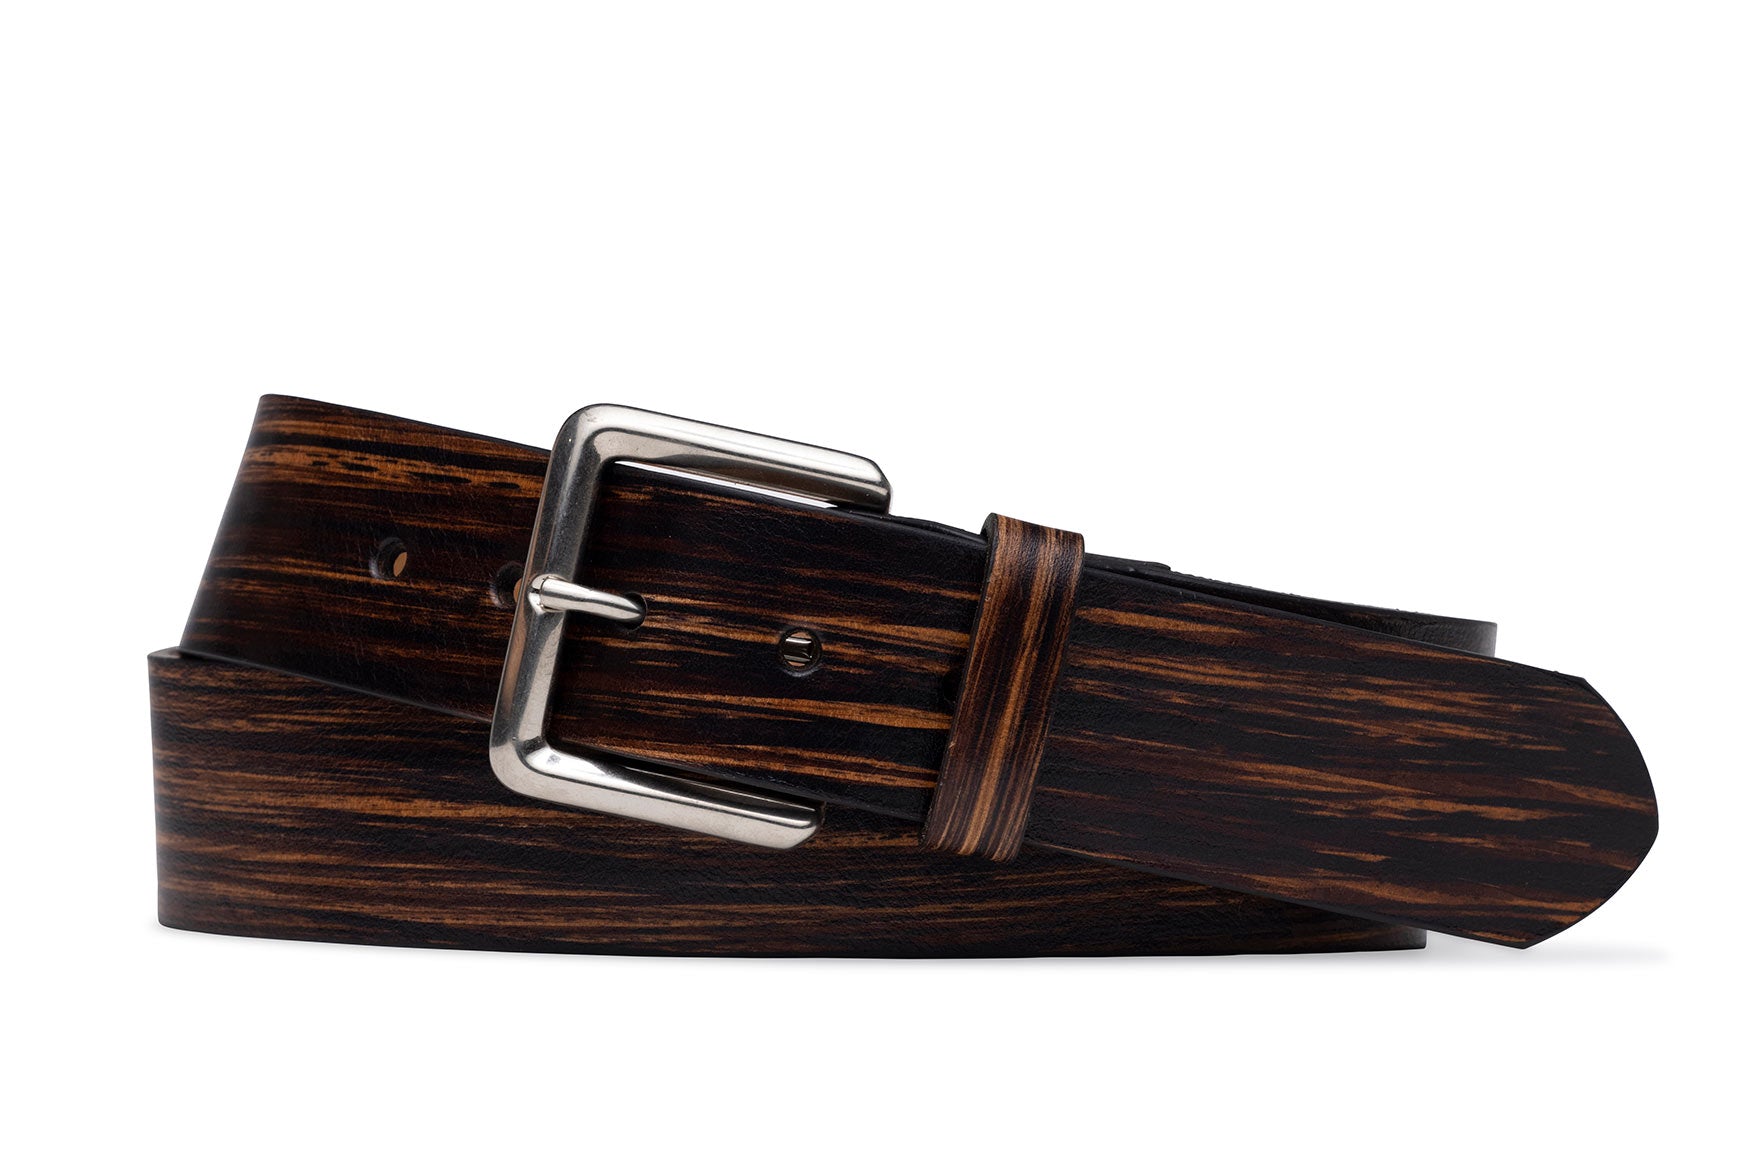 Striped Calf Belt with Antique Nickel Buckle